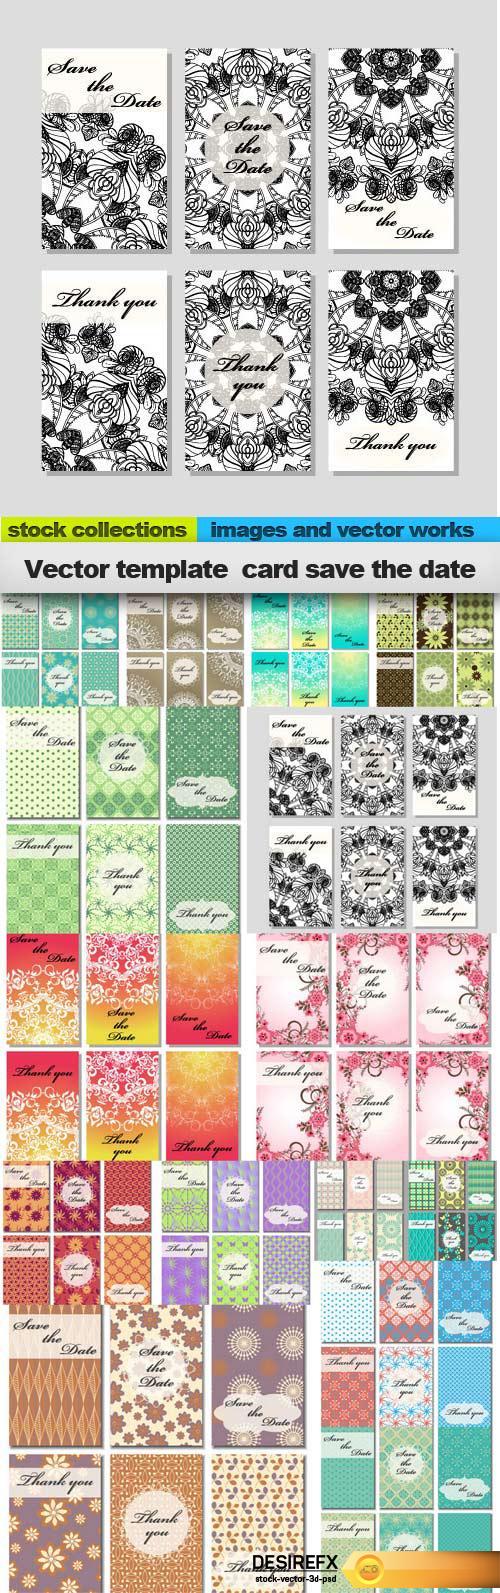 Vector template  card save the date, 15 x EPS